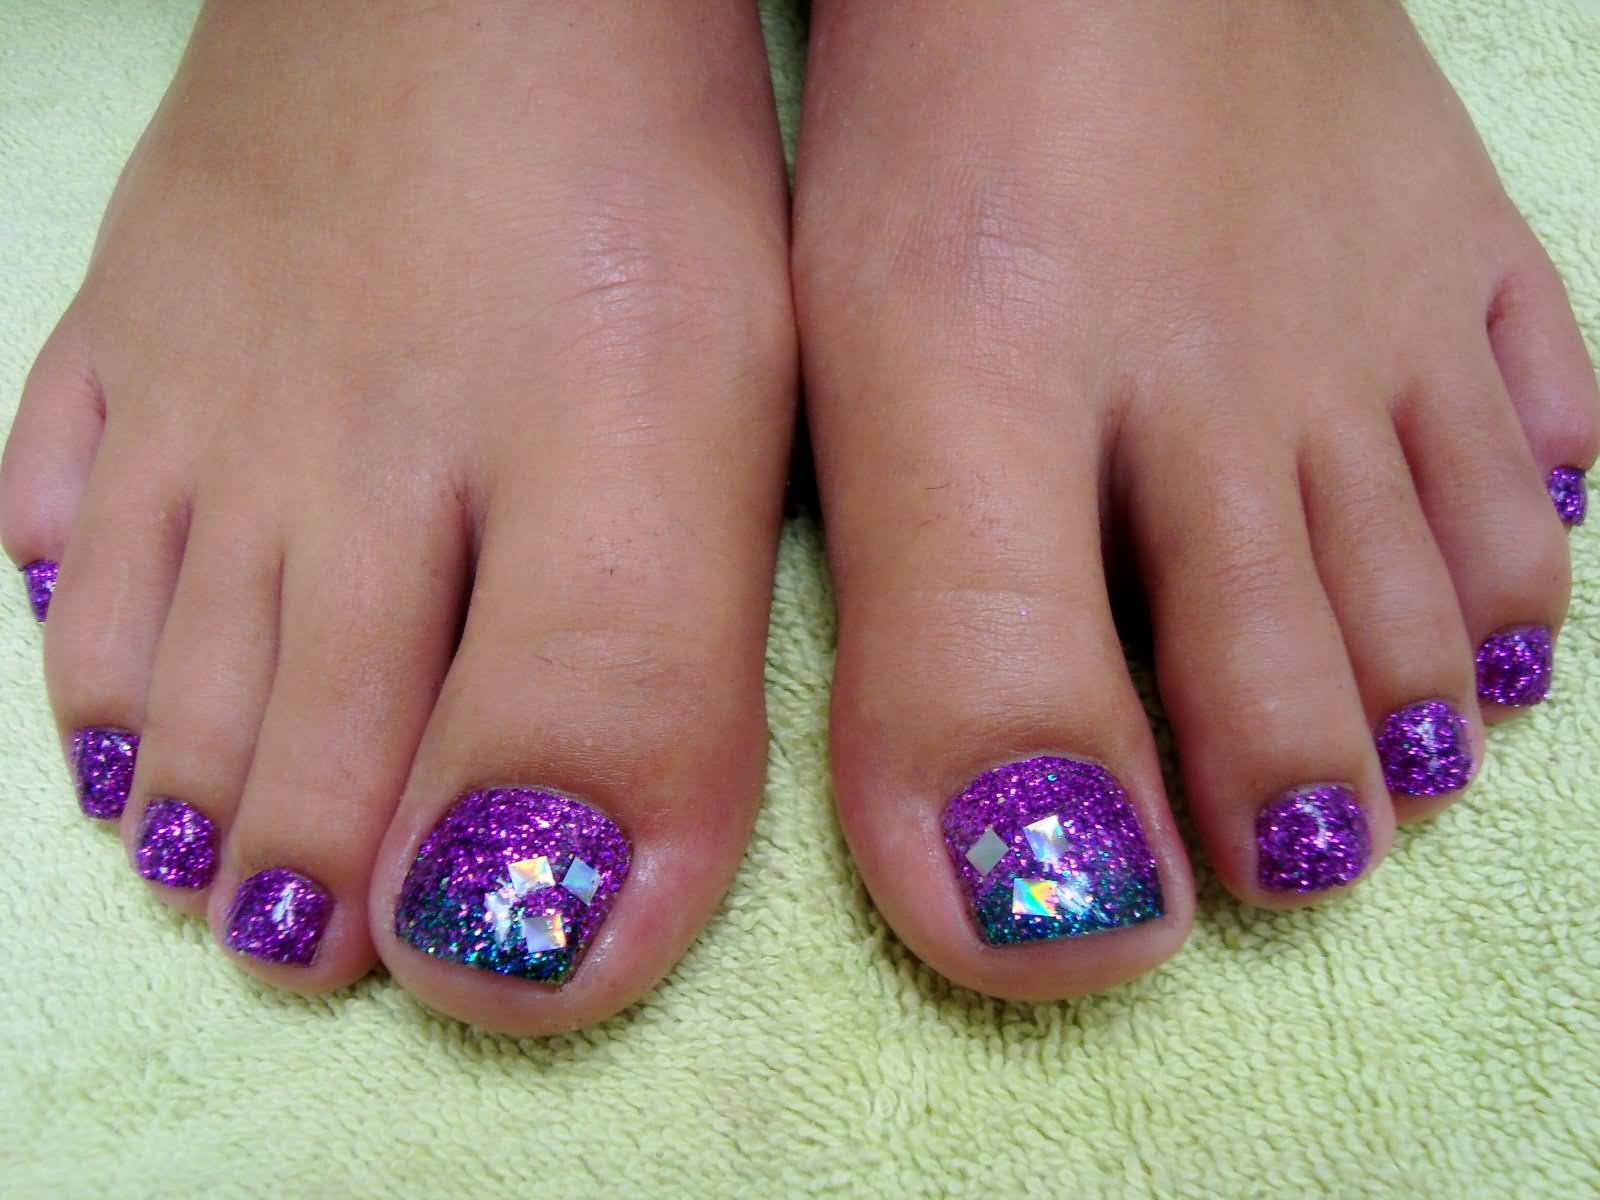 Blue And Purple Glitter Toe Nail Art With Crystals Design Idea